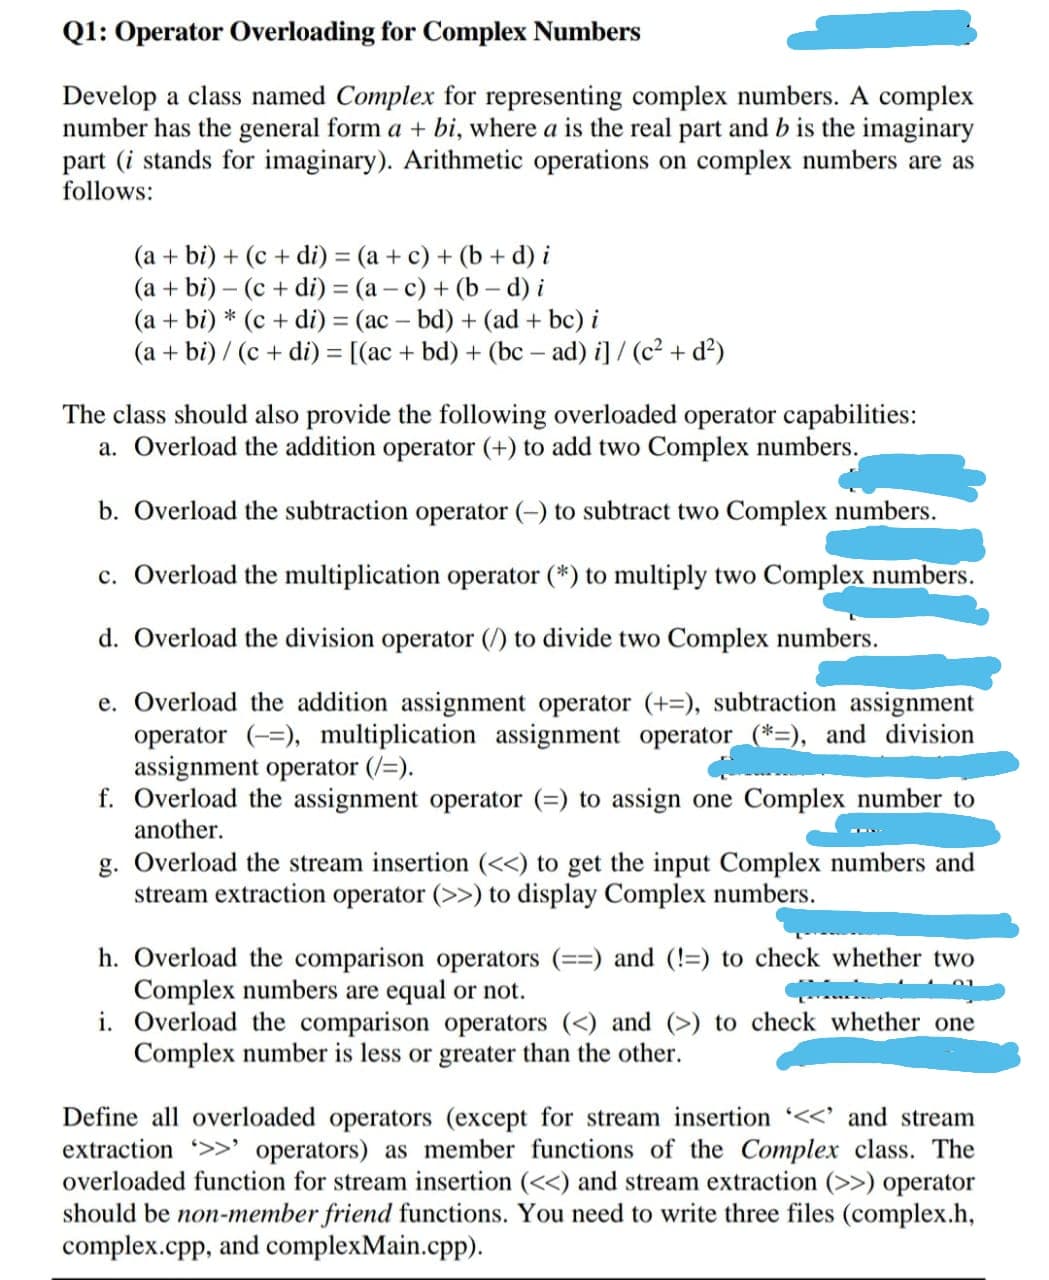 Q1: Operator Overloading for Complex Numbers
Develop a class named Complex for representing complex numbers. A complex
number has the general form a + bi, where a is the real part and b is the imaginary
part (i stands for imaginary). Arithmetic operations on complex numbers are as
follows:
(a + bi) + (c + di) = (a + c) + (b + d) i
(a + bi) – (c + di) = (a – c) + (b d) i
(a + bi) * (c + di) = (ac – bd) + (ad + bc) i
(a + bi) / (c + di) = [(ac + bd) + (bc – ad) i]/ (c² + d?)
The class should also provide the following overloaded operator capabilities:
a. Overload the addition operator (+) to add two Complex numbers.
b. Overload the subtraction operator (-) to subtract two Complex numbers.
c. Overload the multiplication operator (*) to multiply two Complex numbers.
d. Overload the division operator (/) to divide two Complex numbers.
e. Overload the addition assignment operator (+=), subtraction assignment
operator (-=), multiplication assignment operator (*=), and division
assignment operator (/=).
f. Overload the assignment operator (=) to assign one Complex number to
another.
g. Overload the stream insertion (<<) to get the input Complex numbers and
stream extraction operator (>>) to display Complex numbers.
h. Overload the comparison operators
Complex numbers are equal or not.
i. Overload the comparison operators (<) and (>) to check whether one
Complex number is less or greater than the other.
and (!=) to check whether two
%3%3D
Define all overloaded operators (except for stream insertion <<' and stream
extraction >>' operators) as member functions of the Complex class. The
overloaded function for stream insertion (<<) and stream extraction (>>) operator
should be non-member friend functions. You need to write three files (complex.h,
complex.cpp, and complexMain.cpp).
